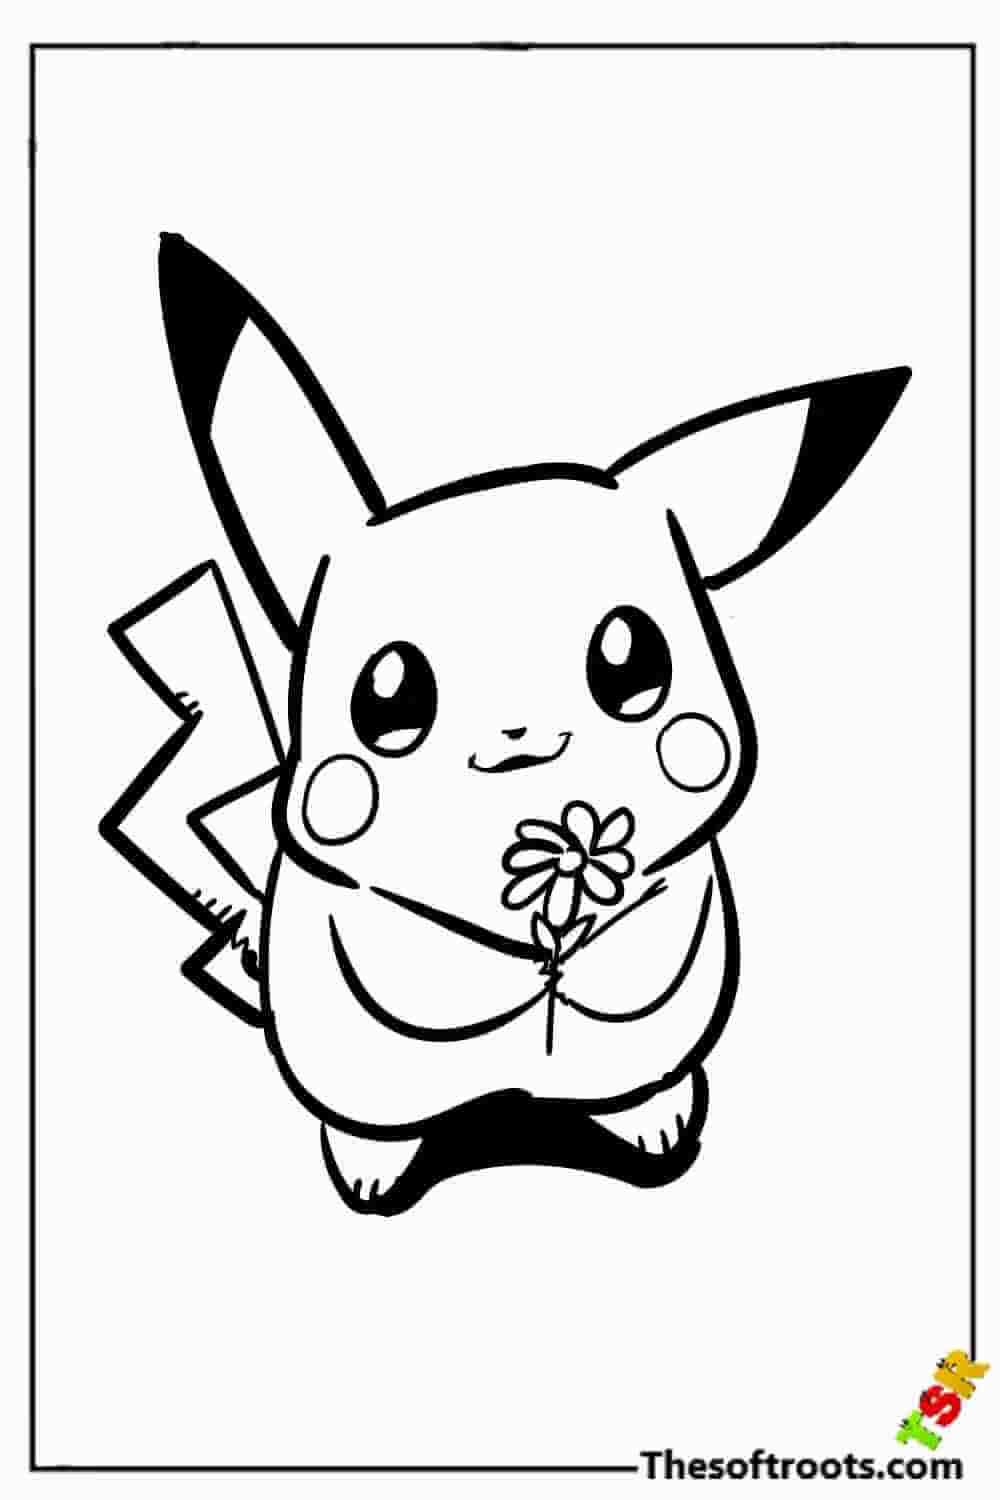 Cute Pikachu coloring pages